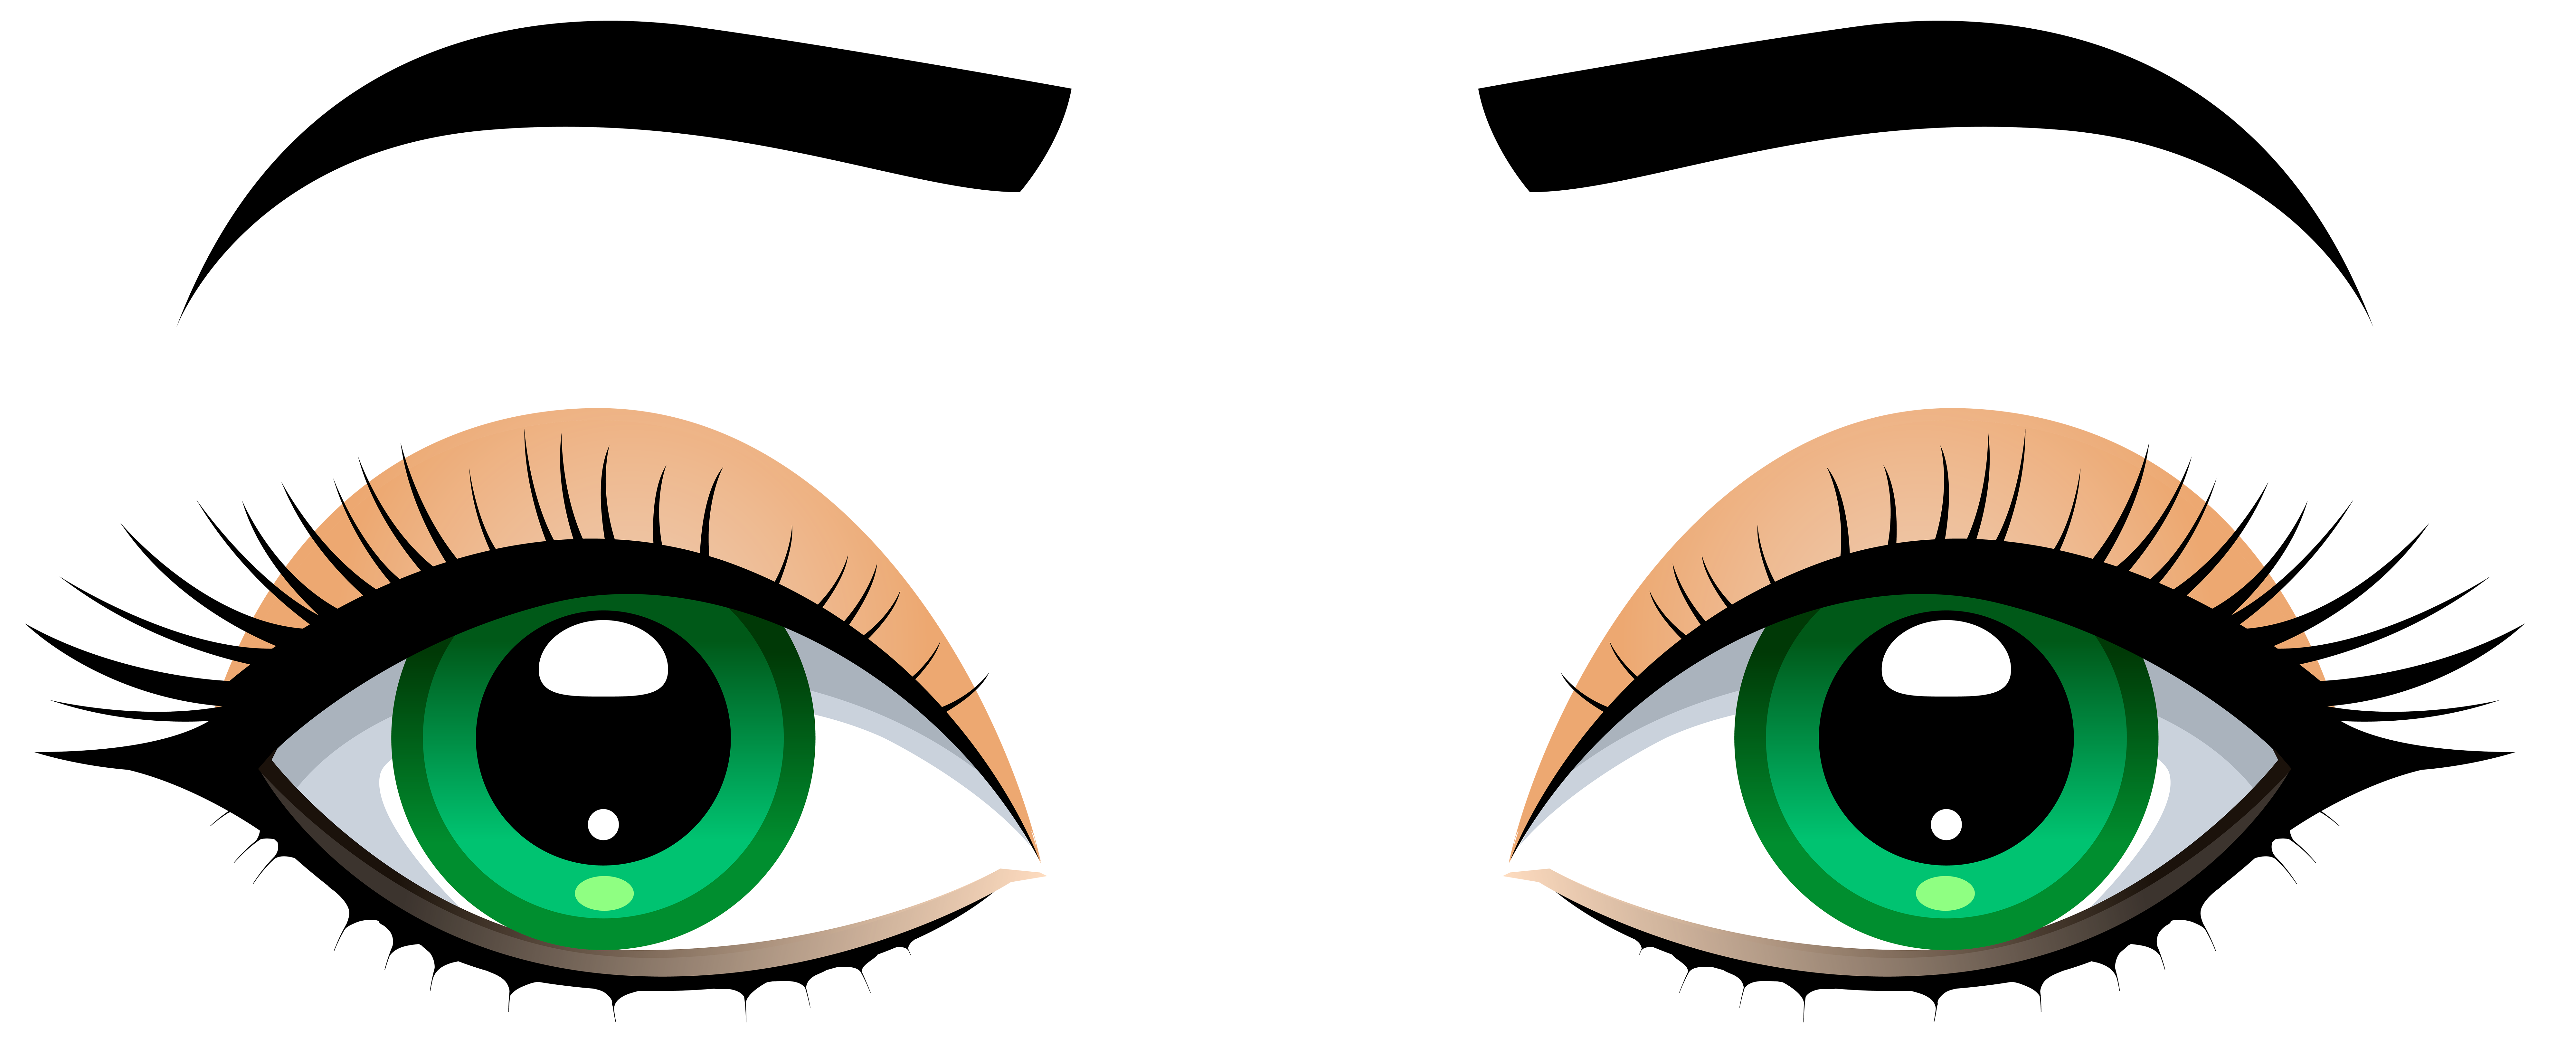 eye graphic clipart